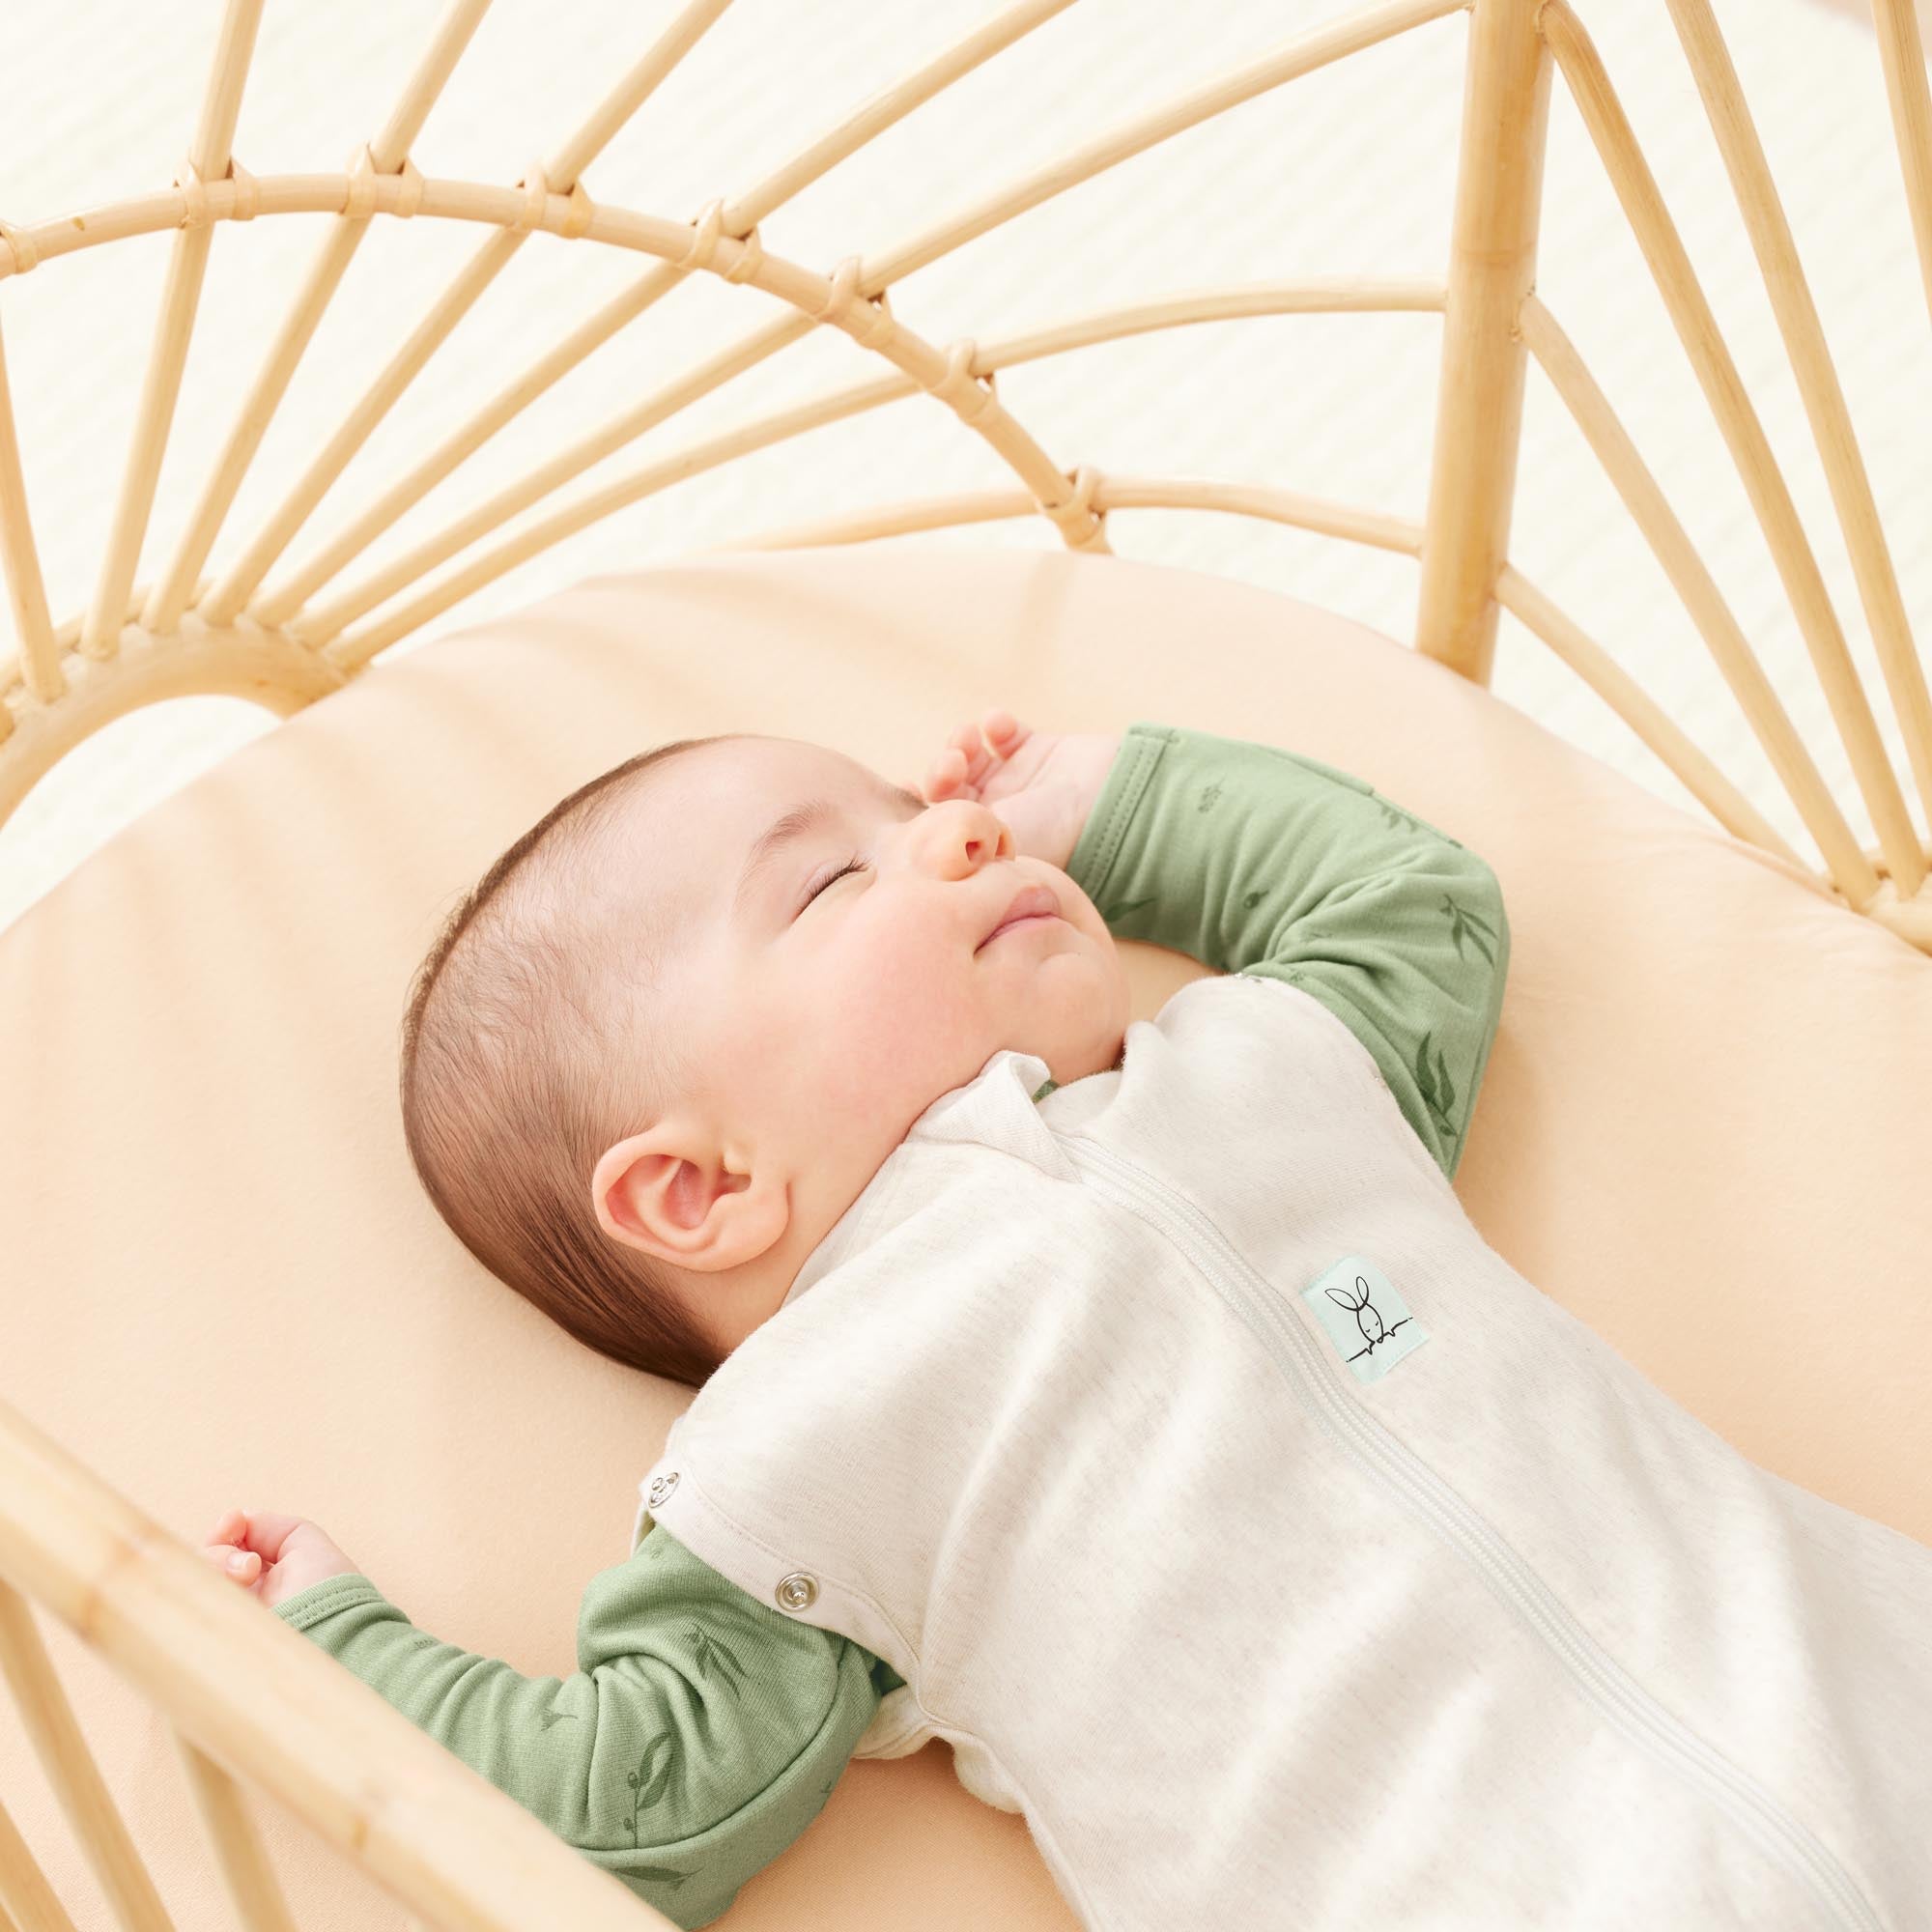 ergoPouch Cocoon Swaddle Bag 0.2 tog Oatmeal Marle